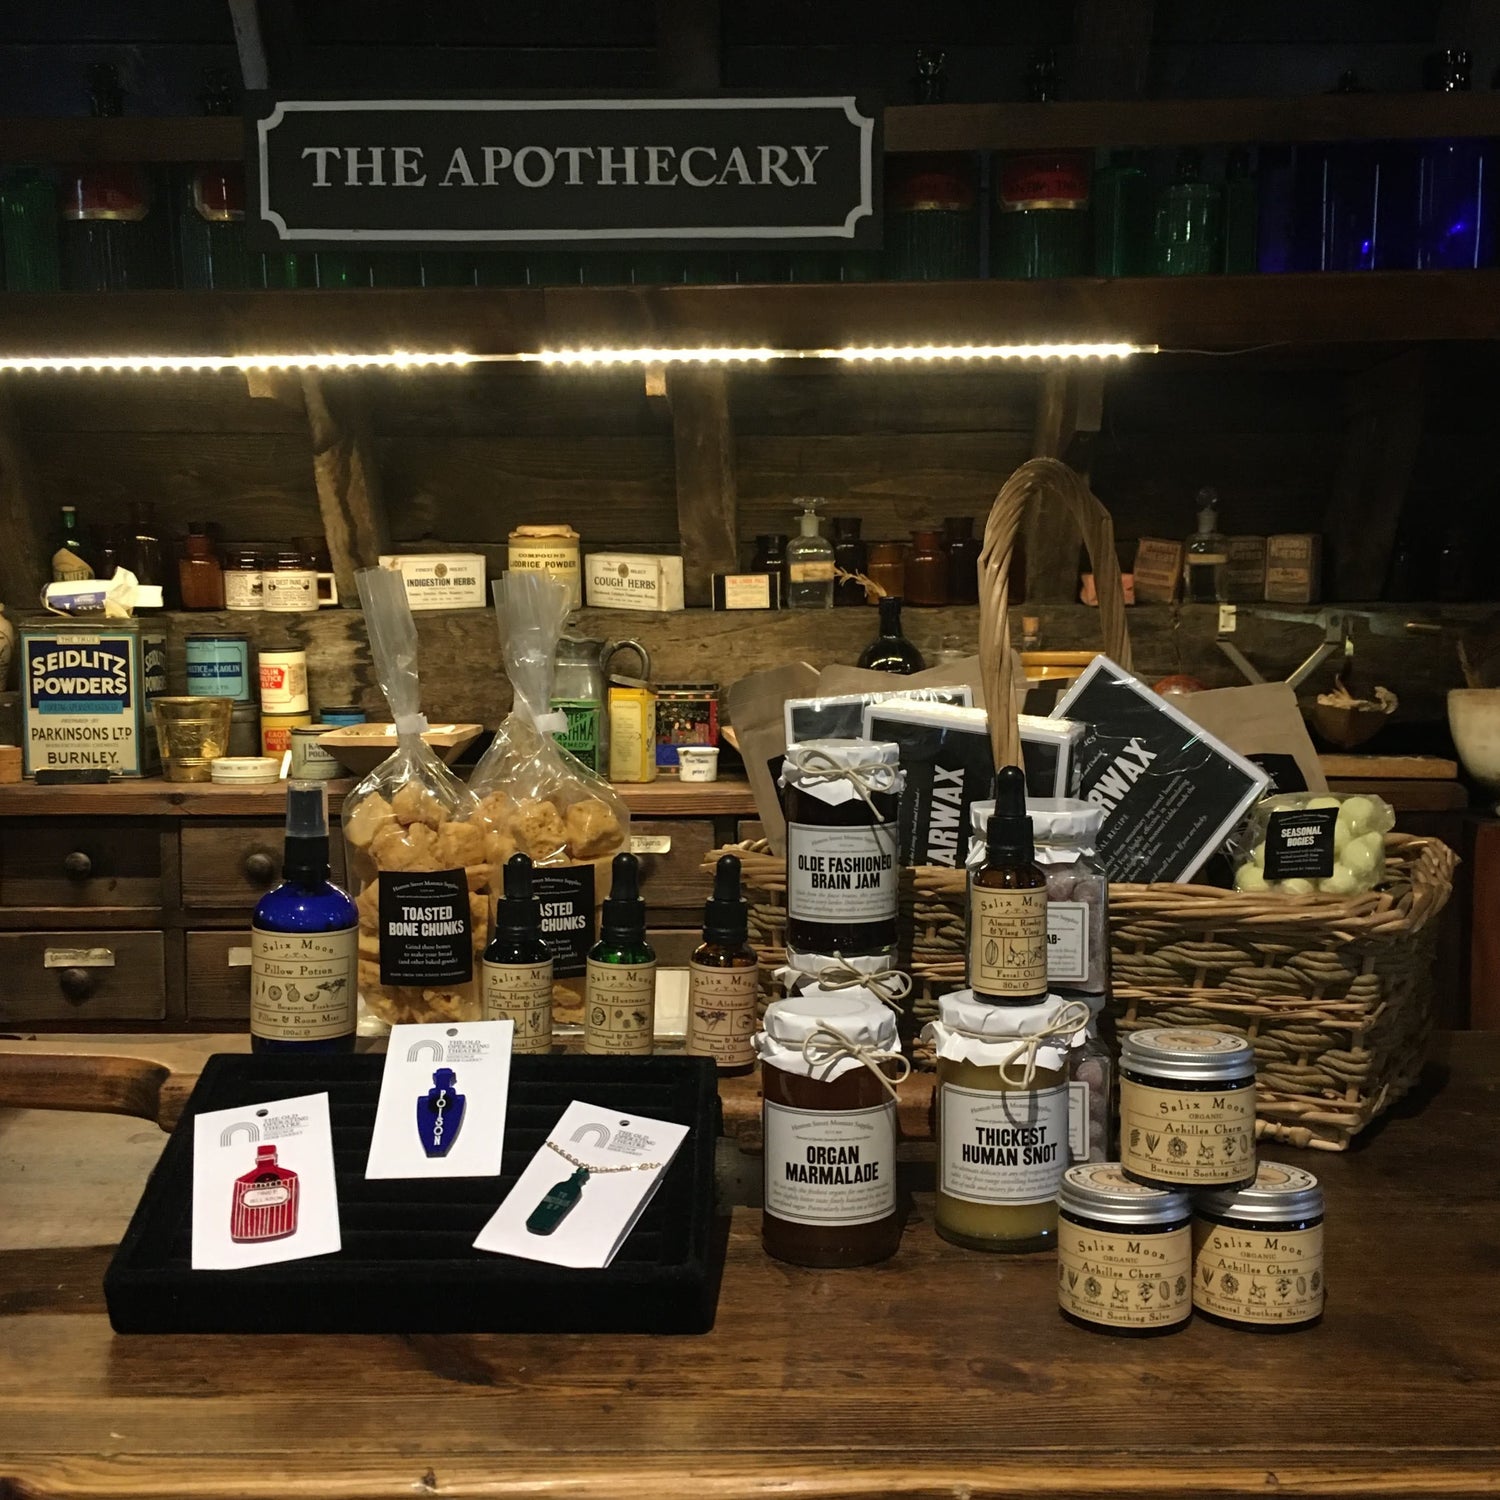 The museum's apothecary counter filled with shop products, including jewellery, jam, balms, tinctures and sweets